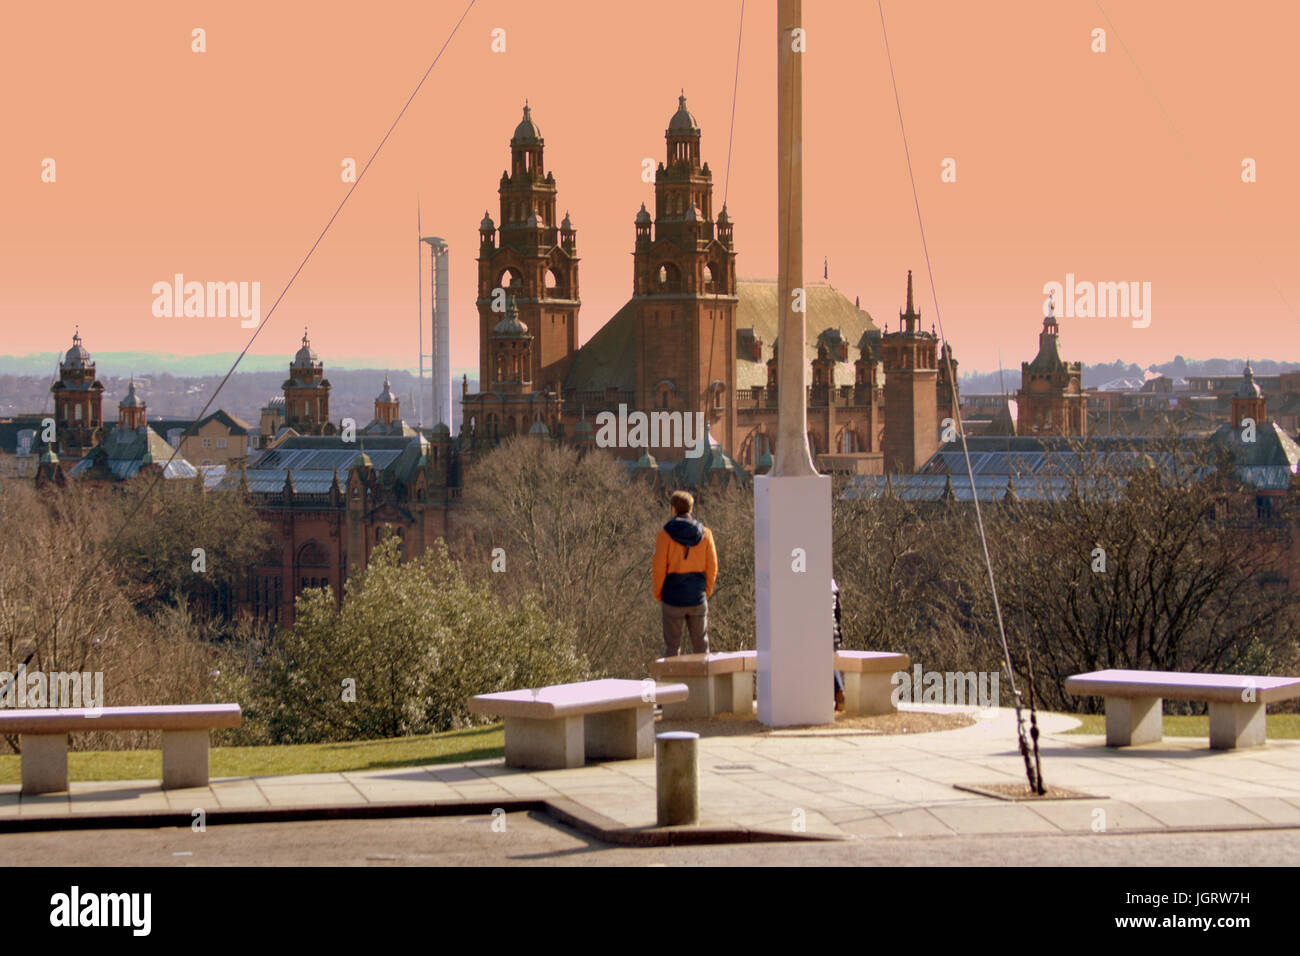 The University of Glasgow, Scotland, UK students on campus grounds panoramic view from flagpole Stock Photo